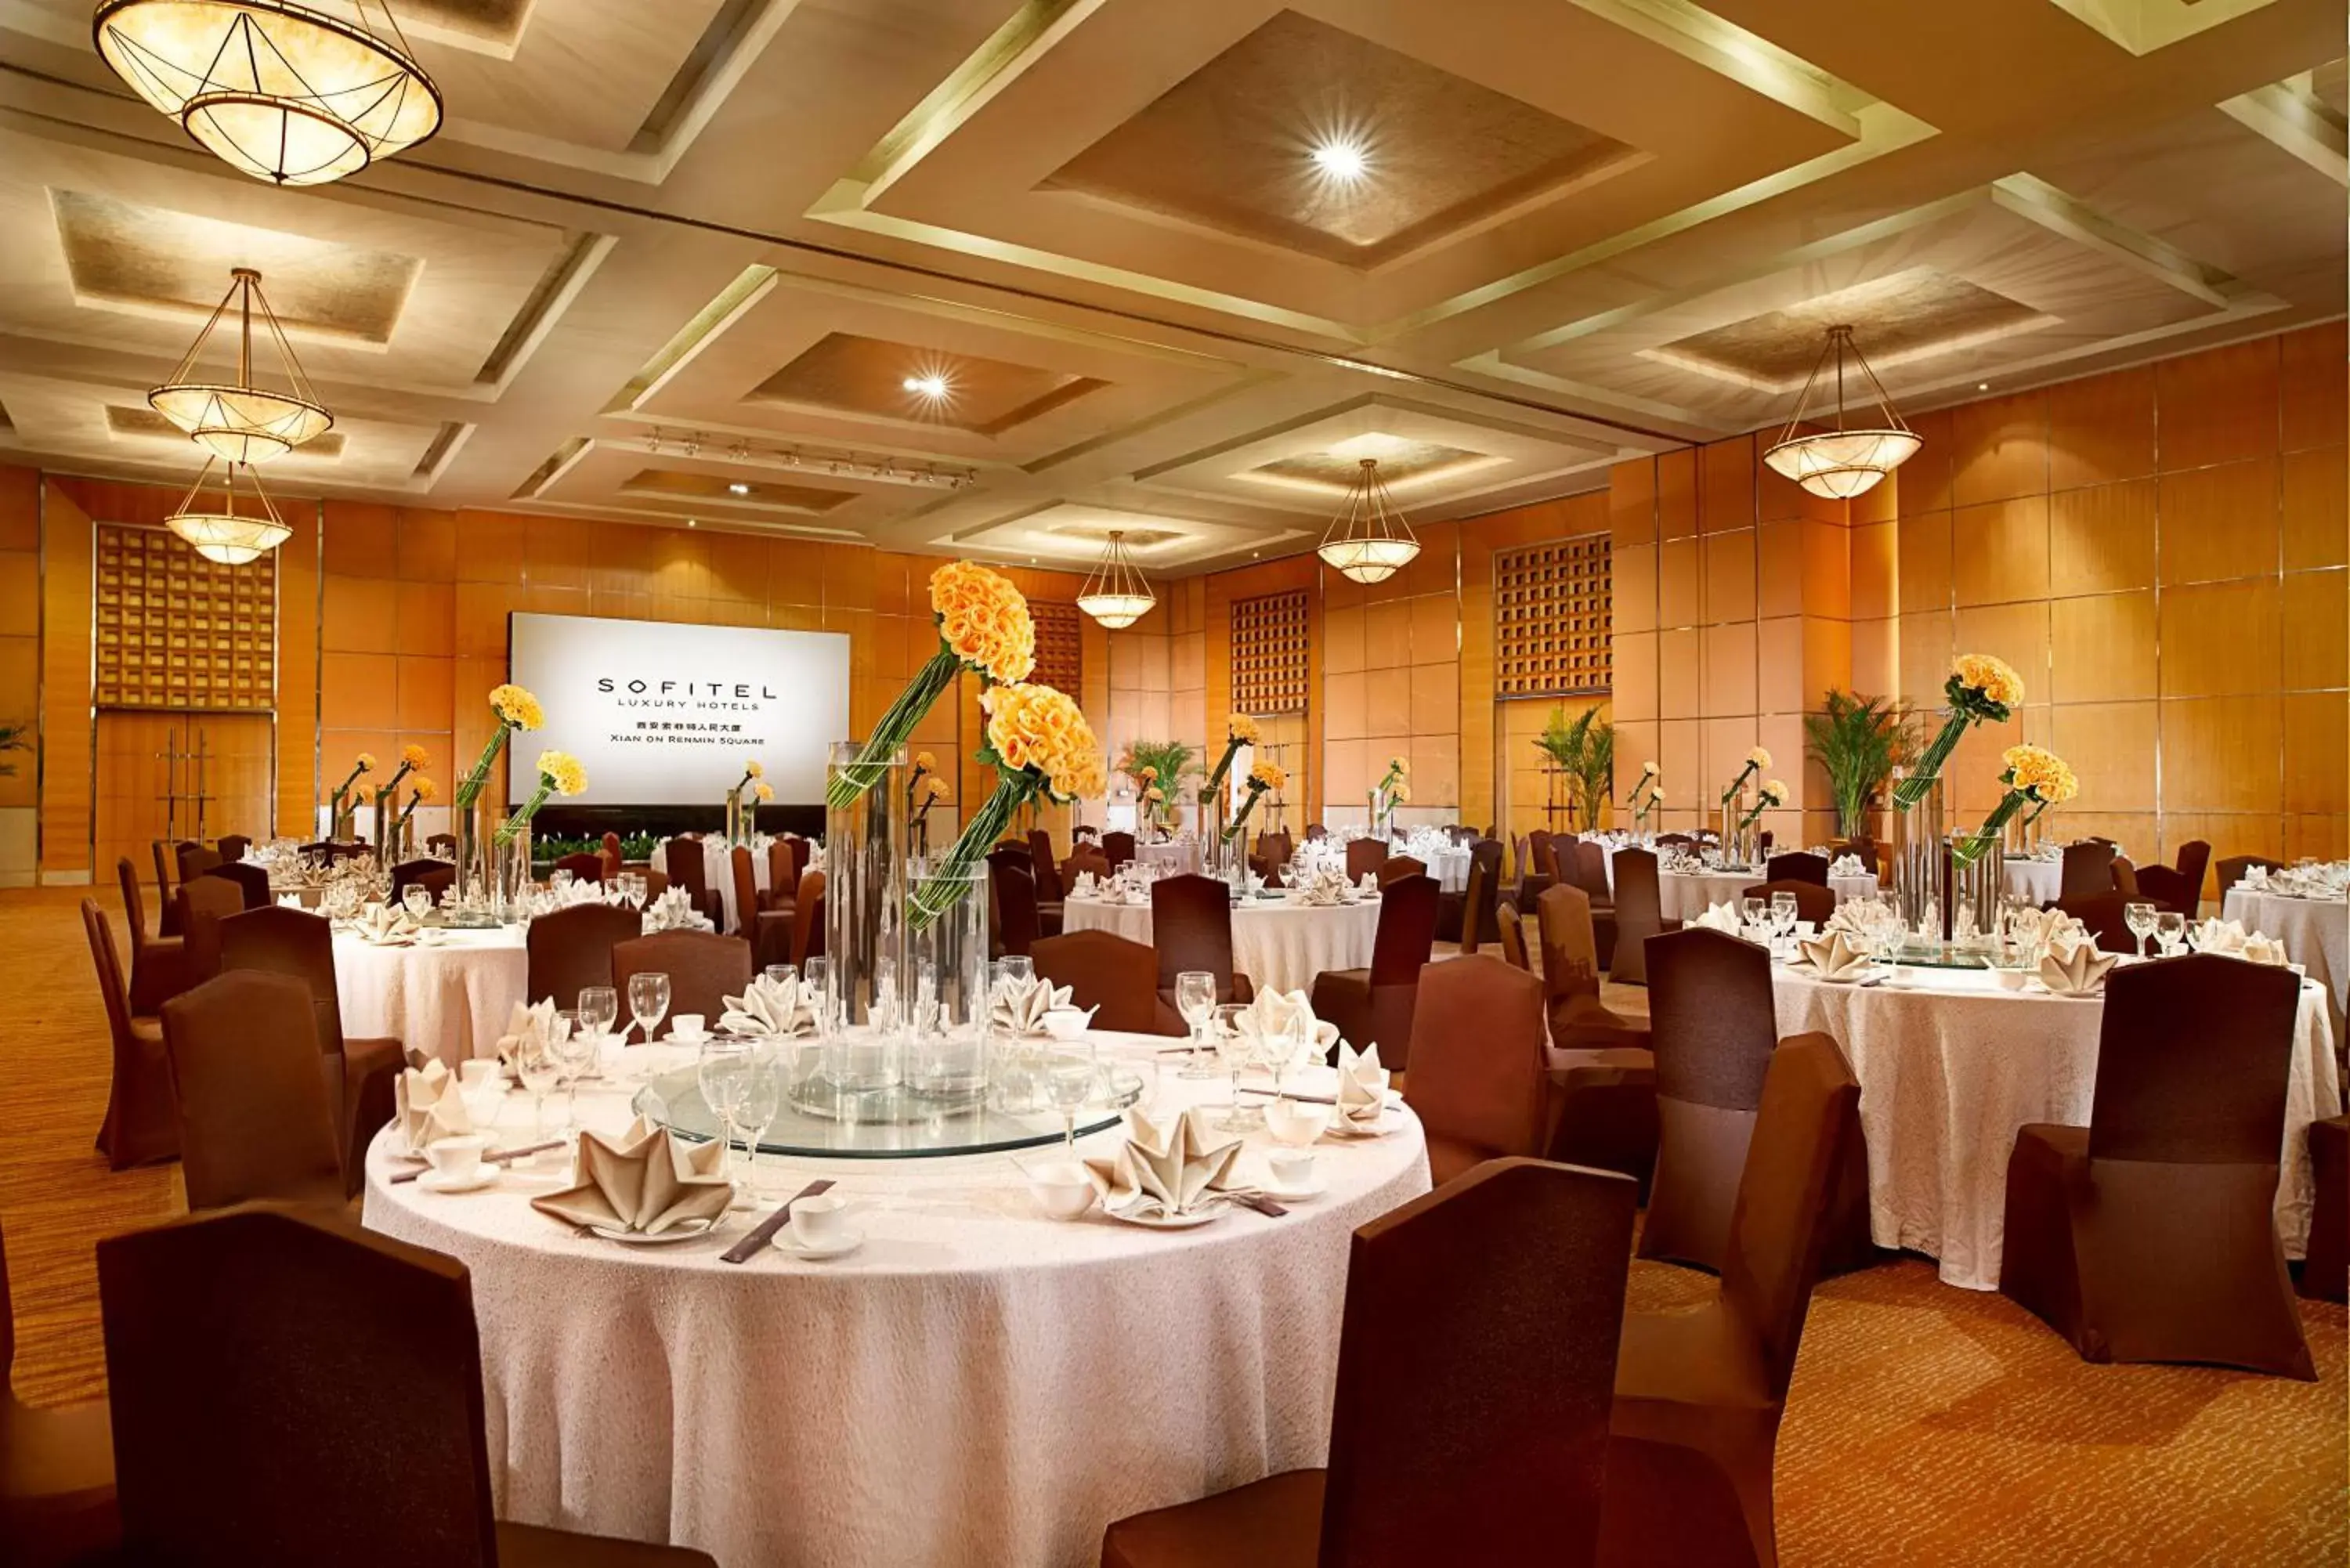 Banquet/Function facilities, Banquet Facilities in Sofitel Legend People's Grand Hotel Xi'an